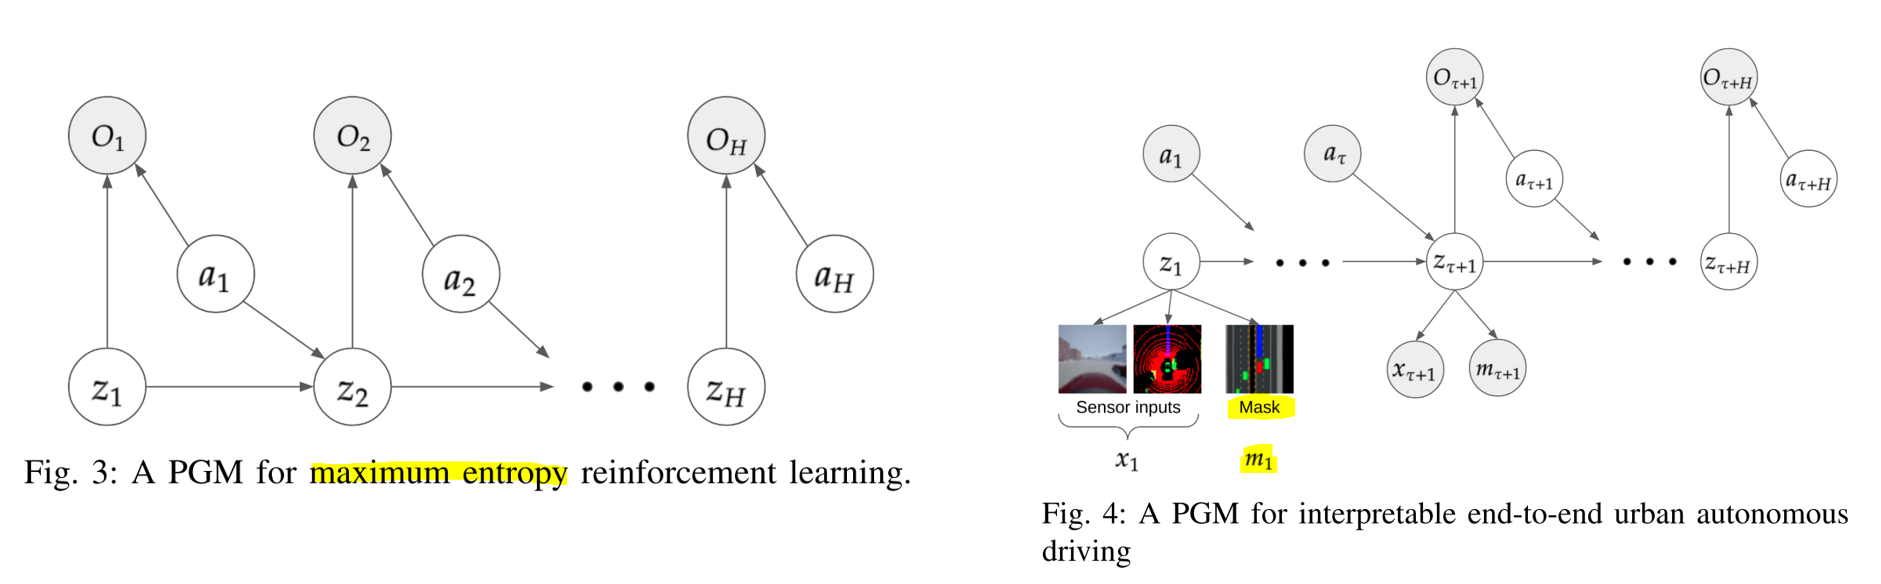 The RL problem is formulated with a probabilistic graphical model (PGM). zt represents for the latent state, i.e. the hidden state. xt is the observation sensor inputs. at is the action. Ot denotes the optimality variable. The authors introduce a mask variable mt and learn its probability of emission conditioned on z. Source.